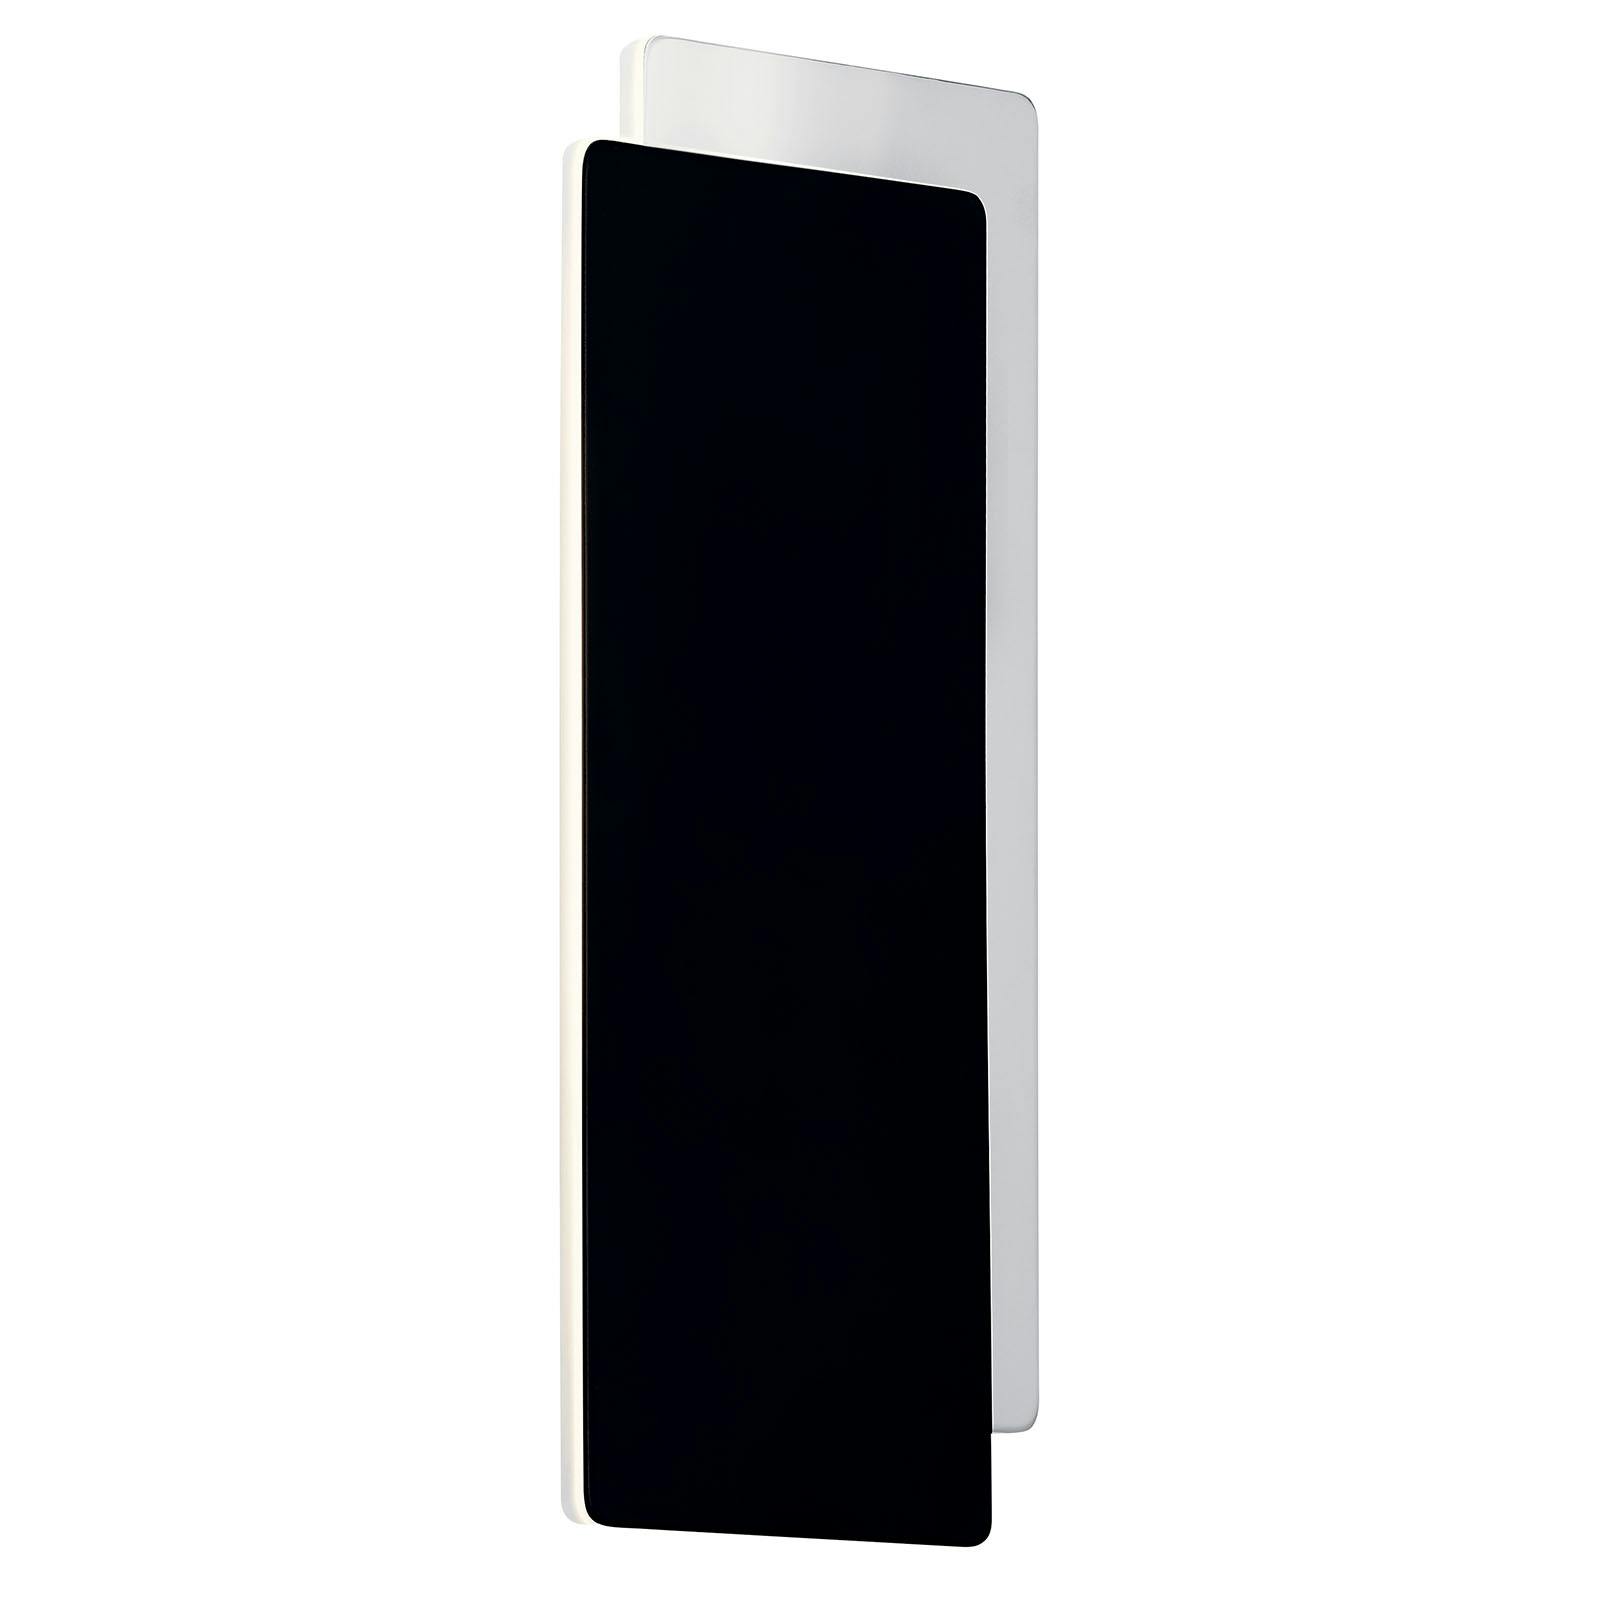 Slade 14" LED Wall Sconce Matte Black on a white background